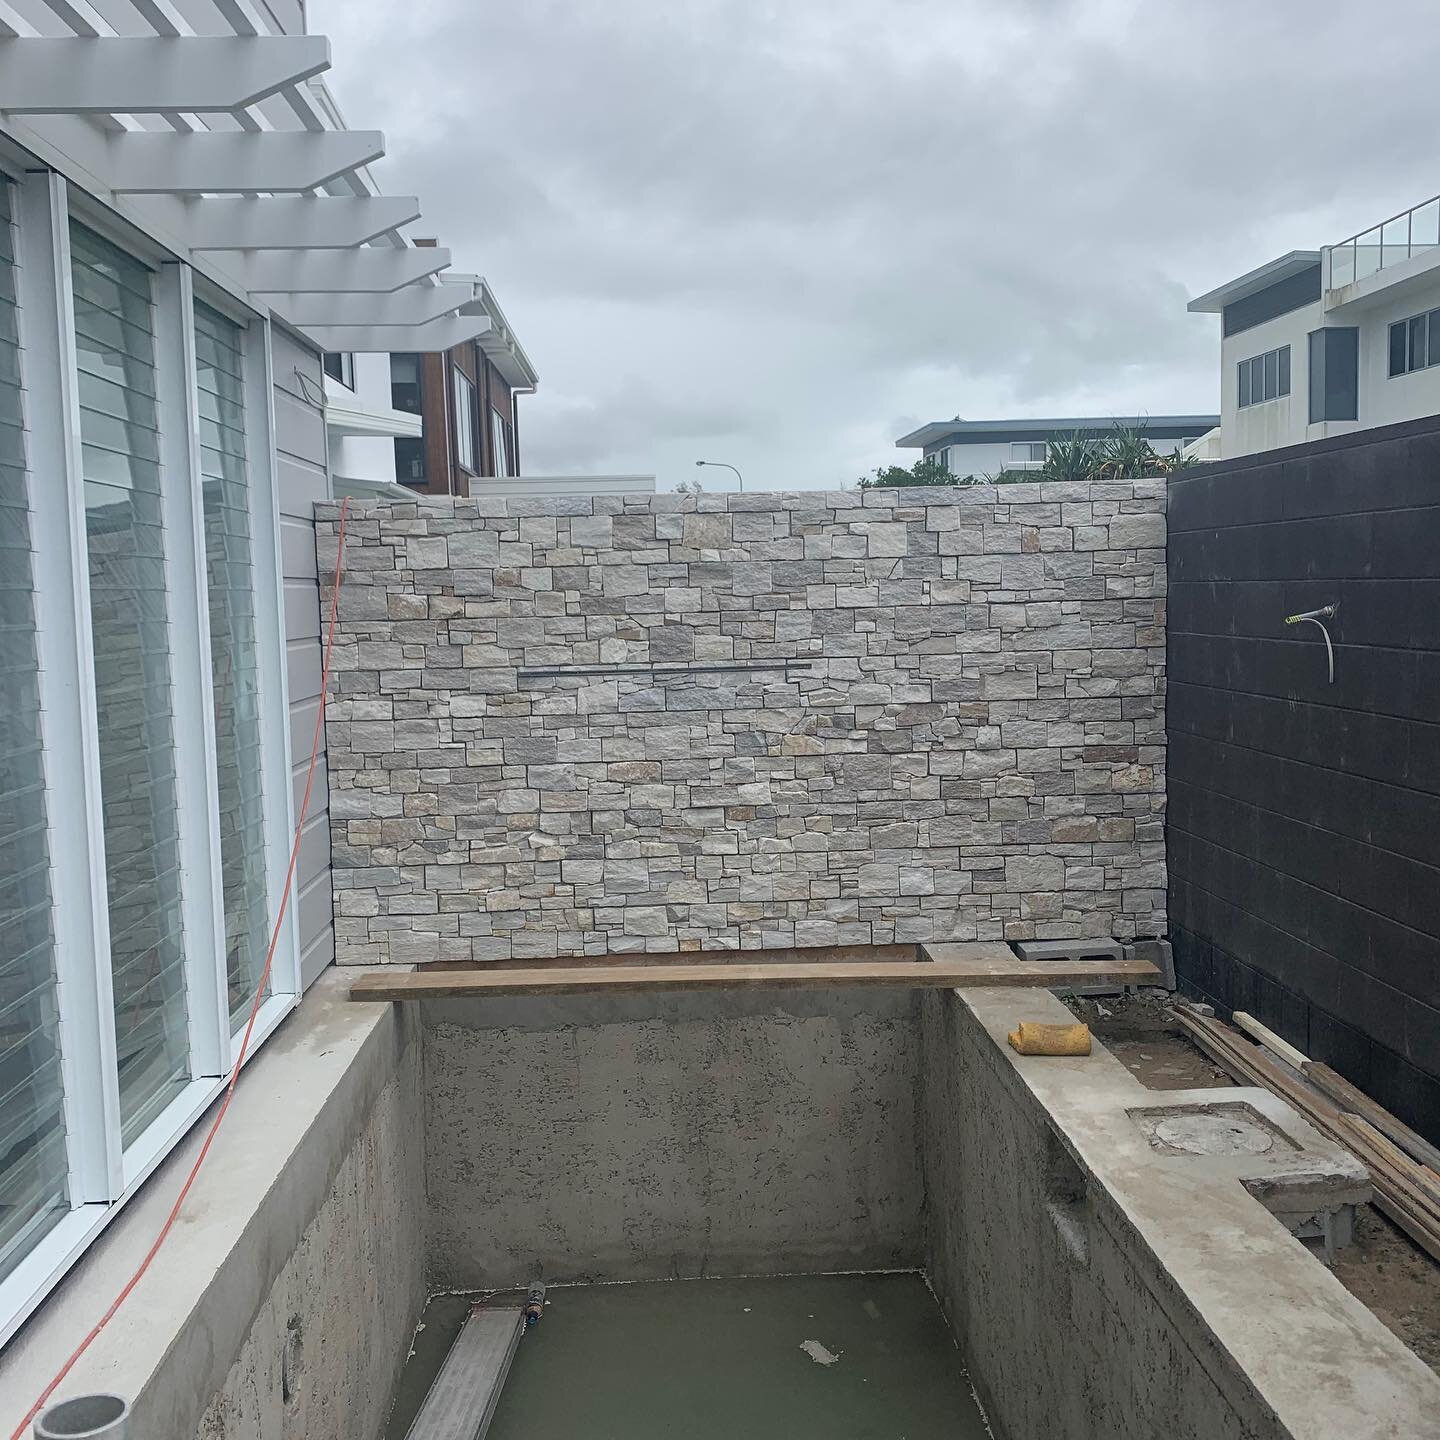 Statement piece! Stack-stone feature wall for the plunge pool 🏊&zwj;♂️ had to be laid 2 rows per day. This one also incorporates a water feature. So worth it! 
#stackstone #pool #plungepool #featurewall #waterfeature asona #asonaconstructions #first